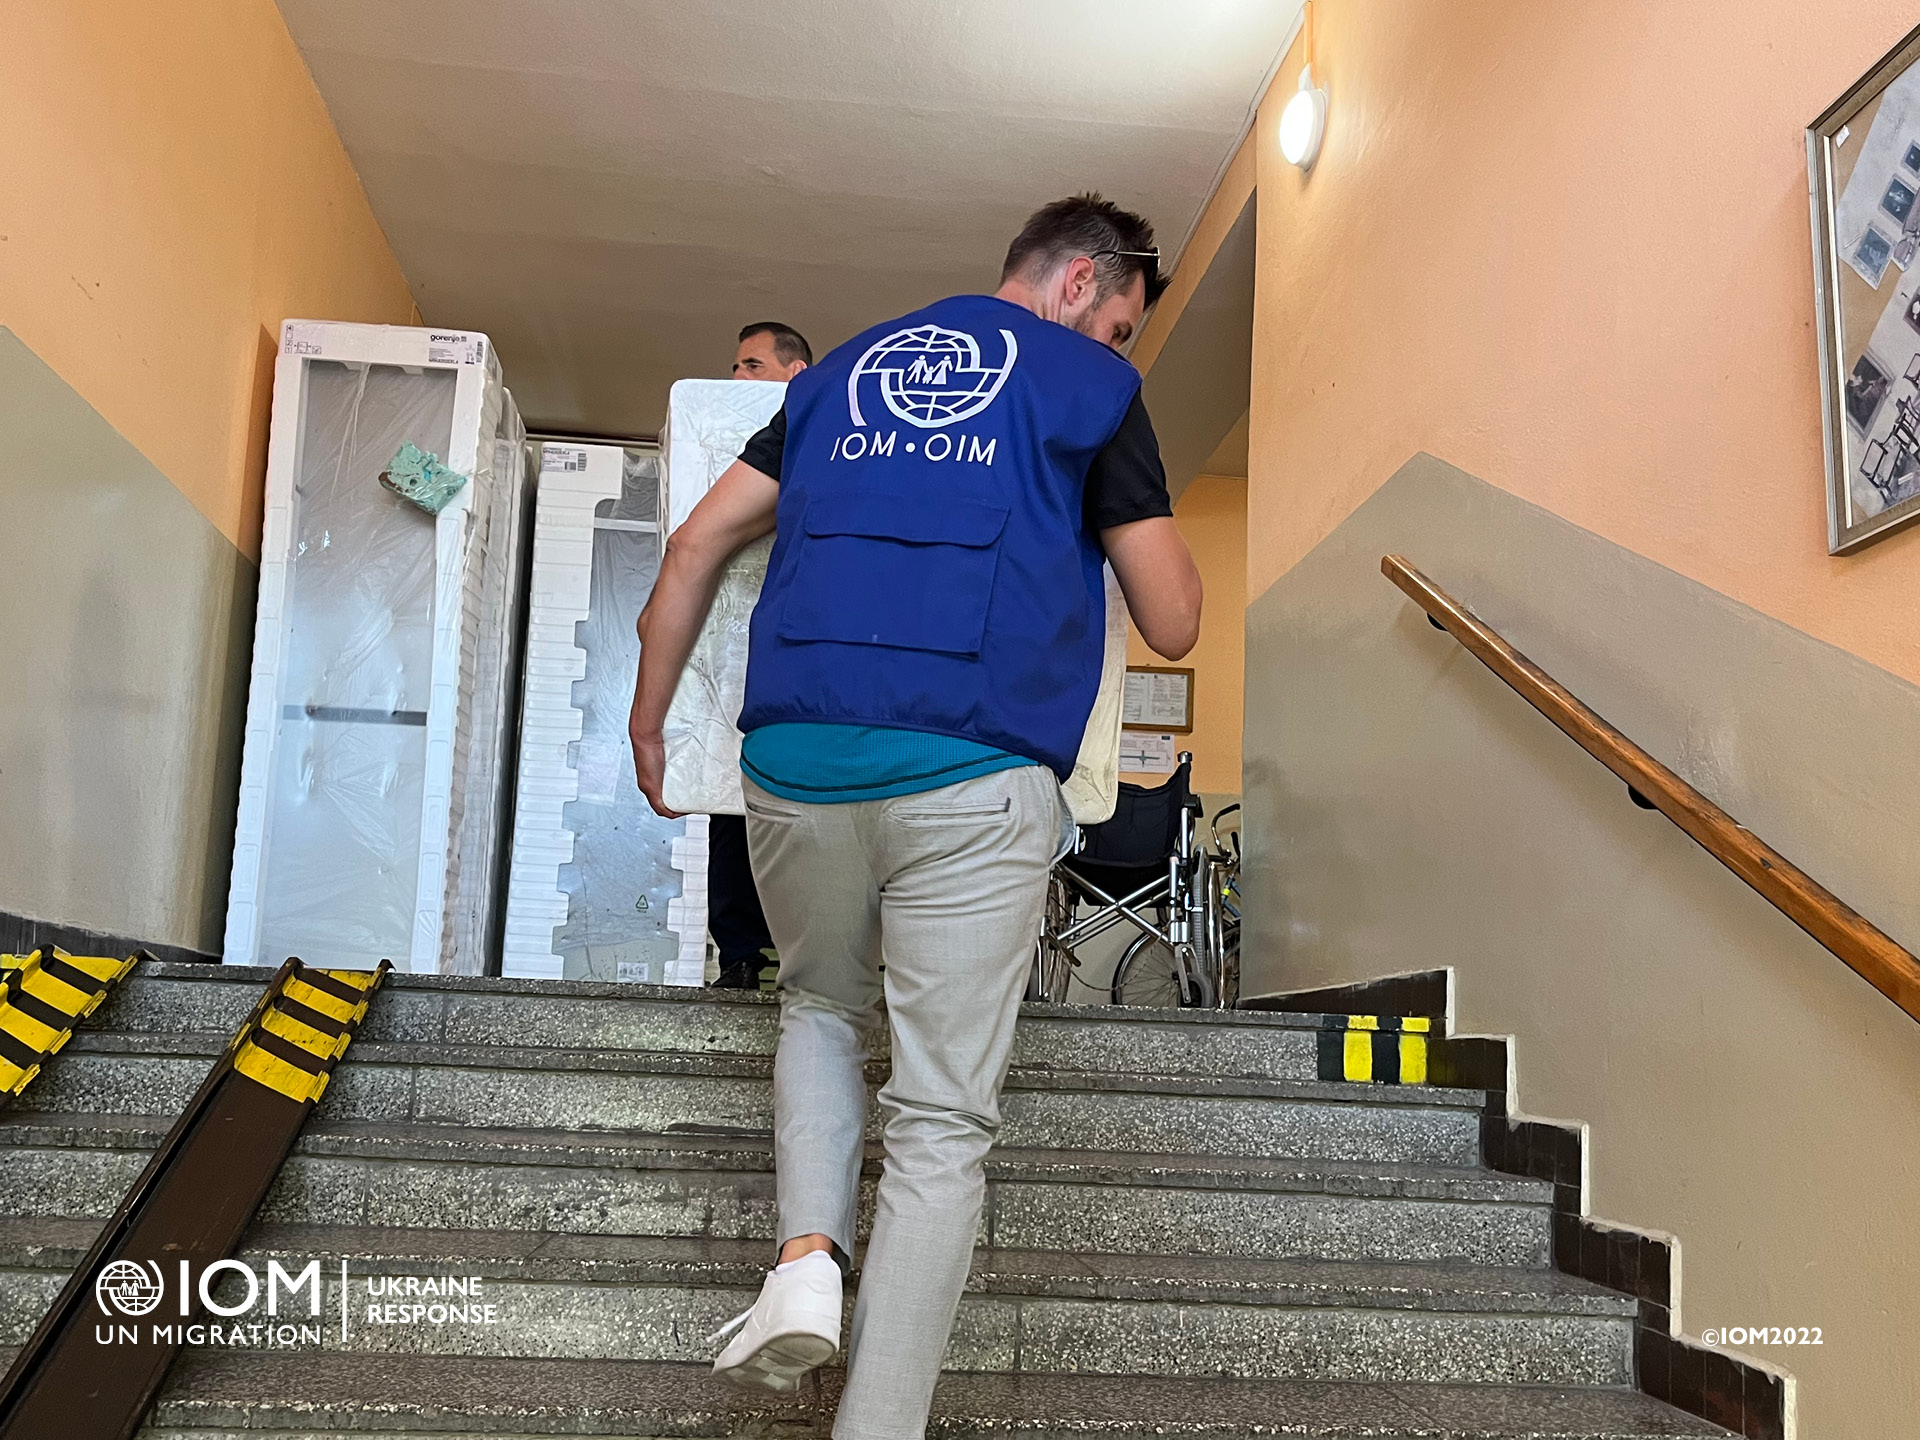 Refrigerators and vacuum cleaners delivery to the Accomodation Facility in Martin - 2.  Photo © International Organization for Migration (IOM) 2022.